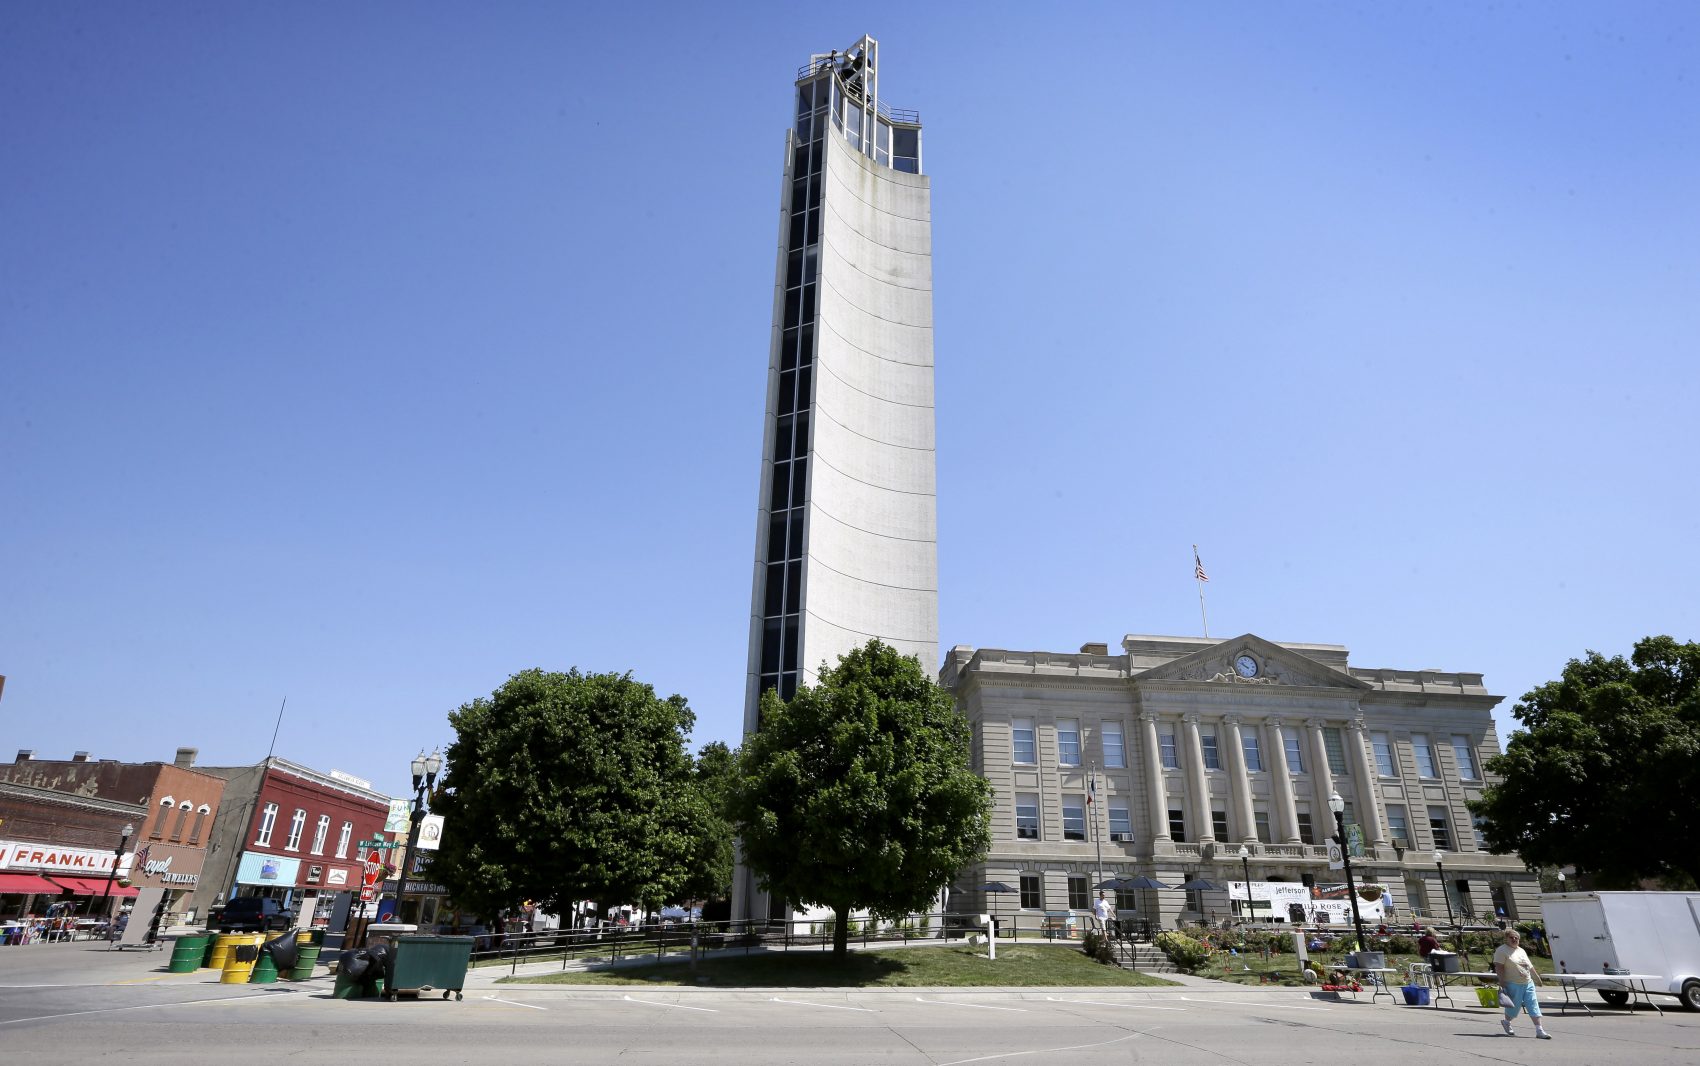 The Mahanay Memorial Carillon Tower is seen next to the Greene County Courthouse, Friday, June 10, 2016, in Jefferson, Iowa. (Charlie Neibergall/AP)